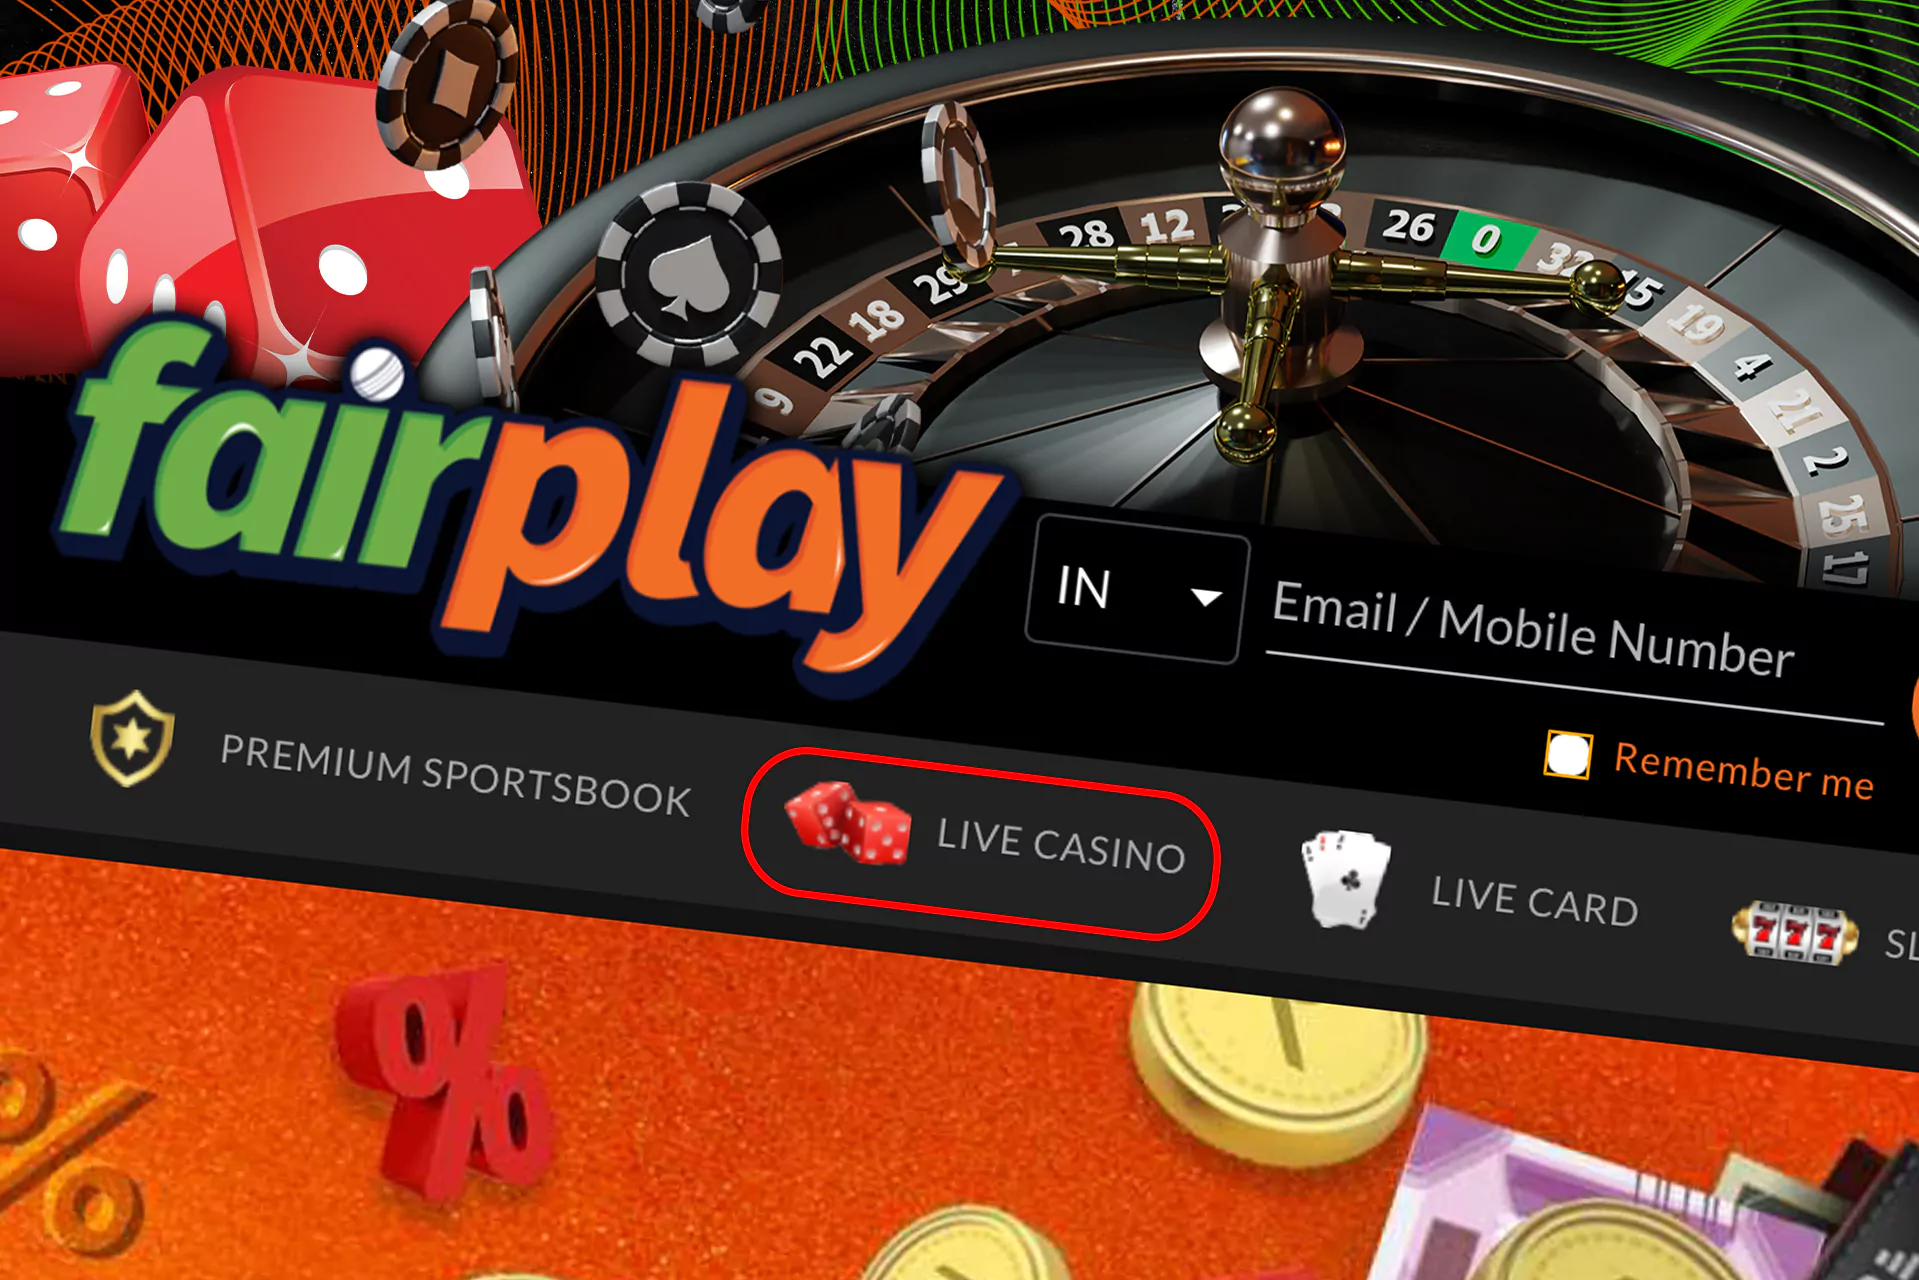 There are a lot of casino games with live dealers.